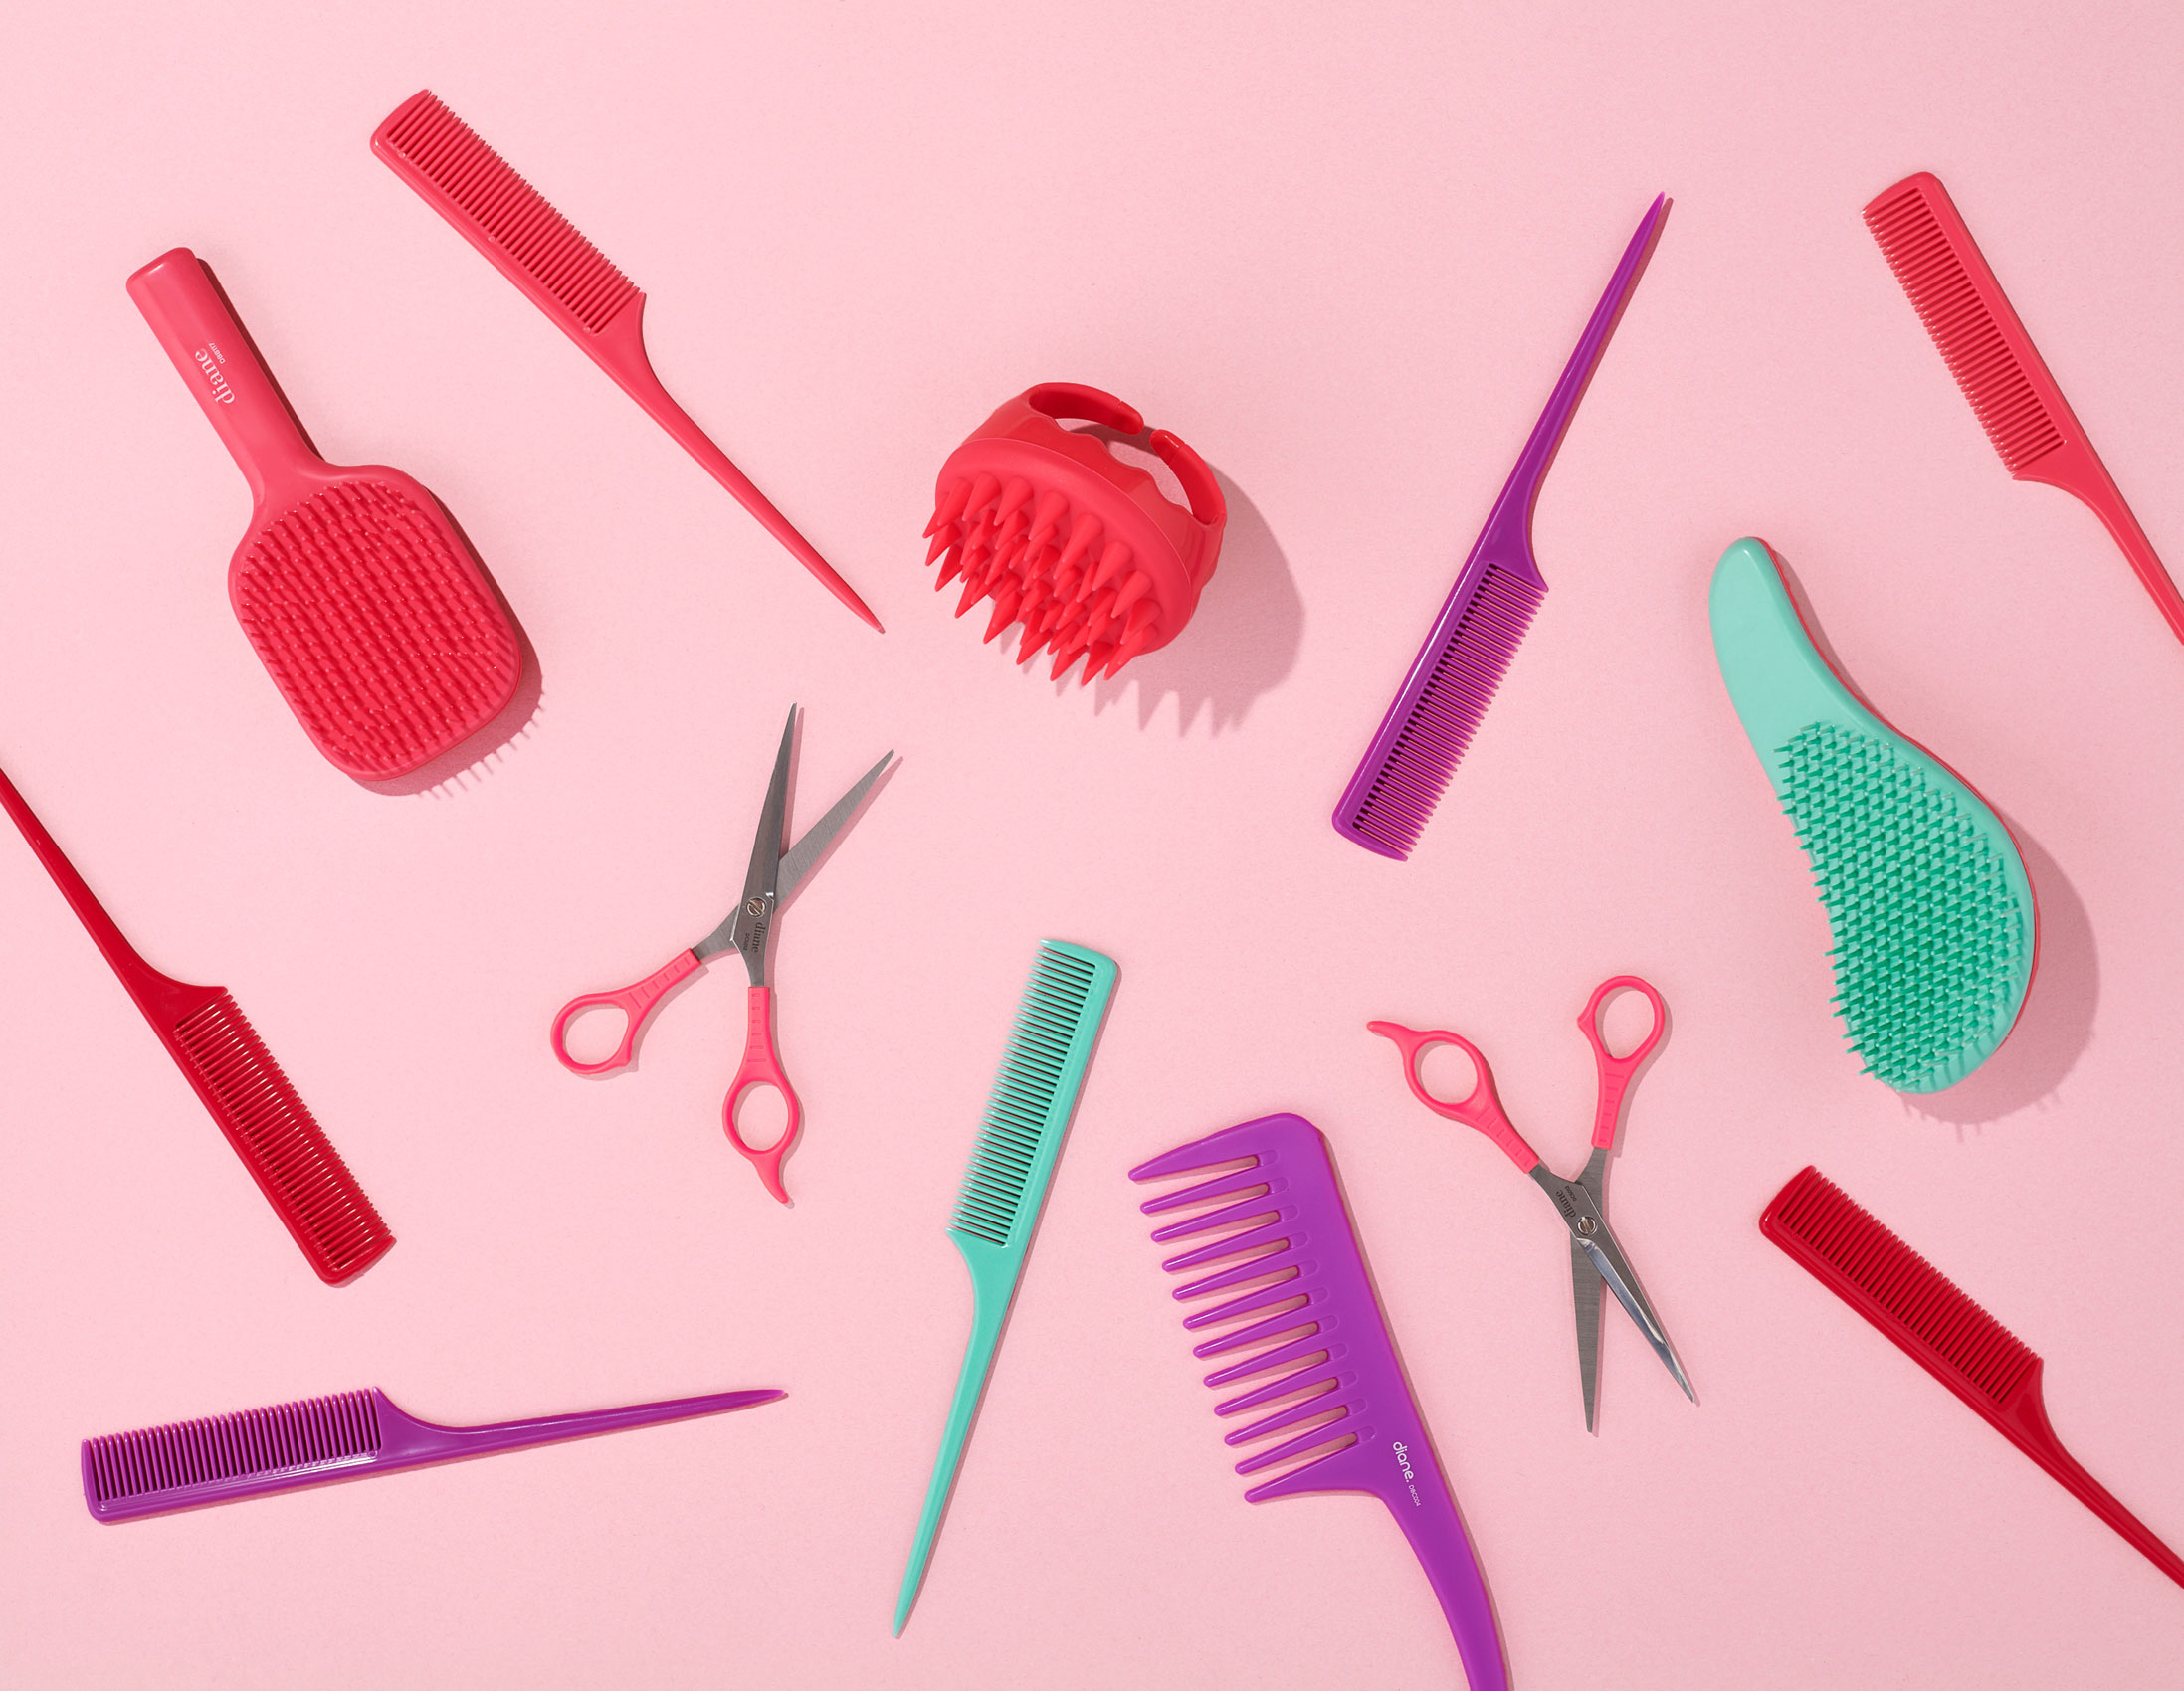 Variety of hair tools on pink surface